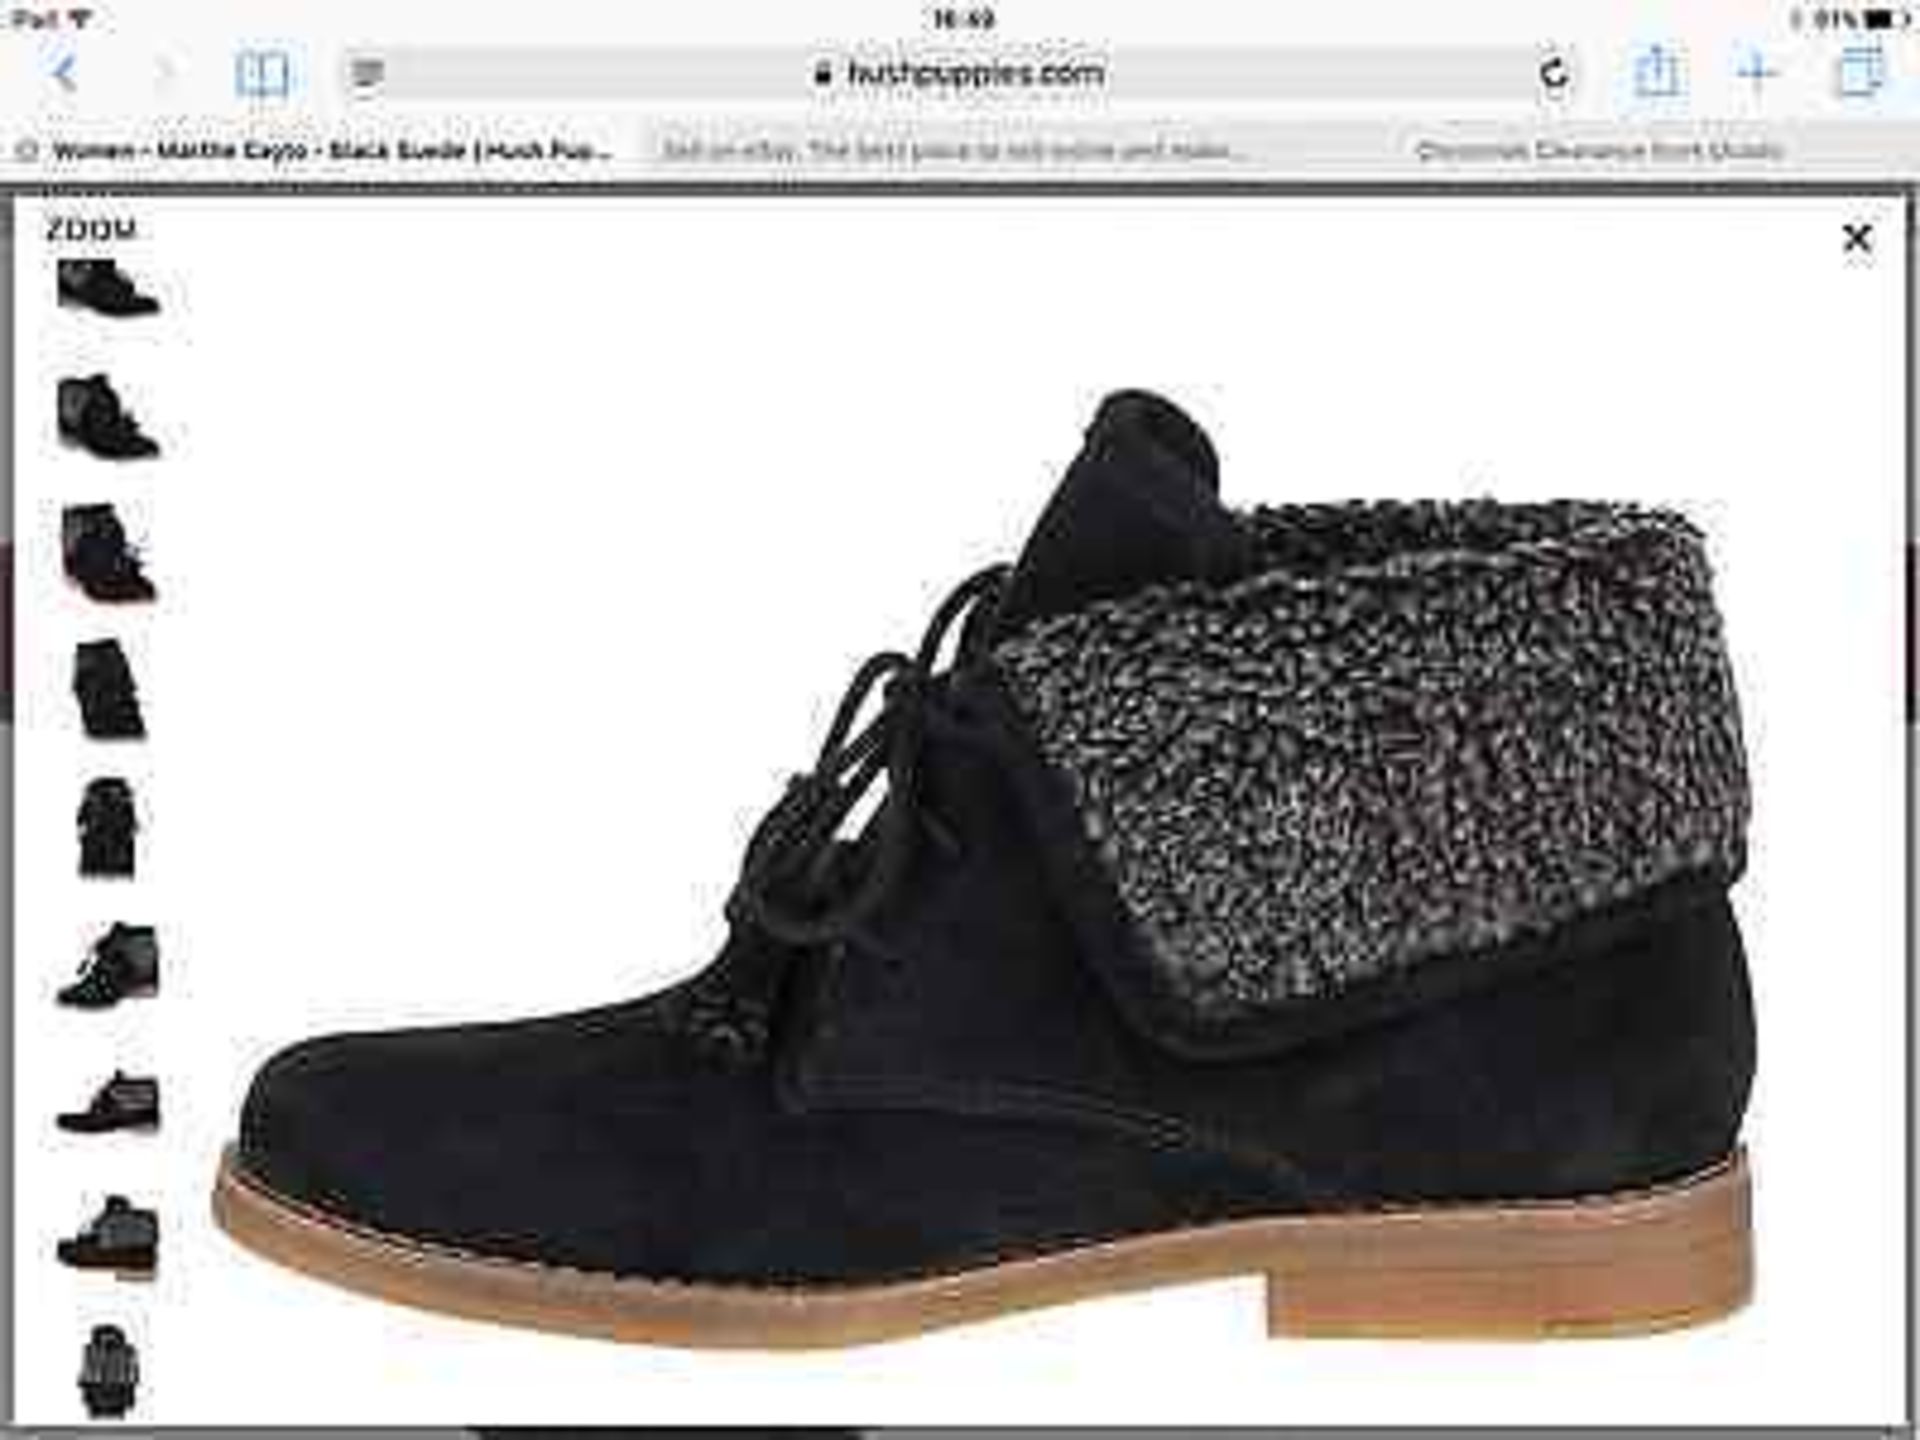 Hush Puppies Black Suede Martha Cayto Ankle Boot, Size UK 7, RRP £100 (New with box) [Ref: ] - Image 8 of 12